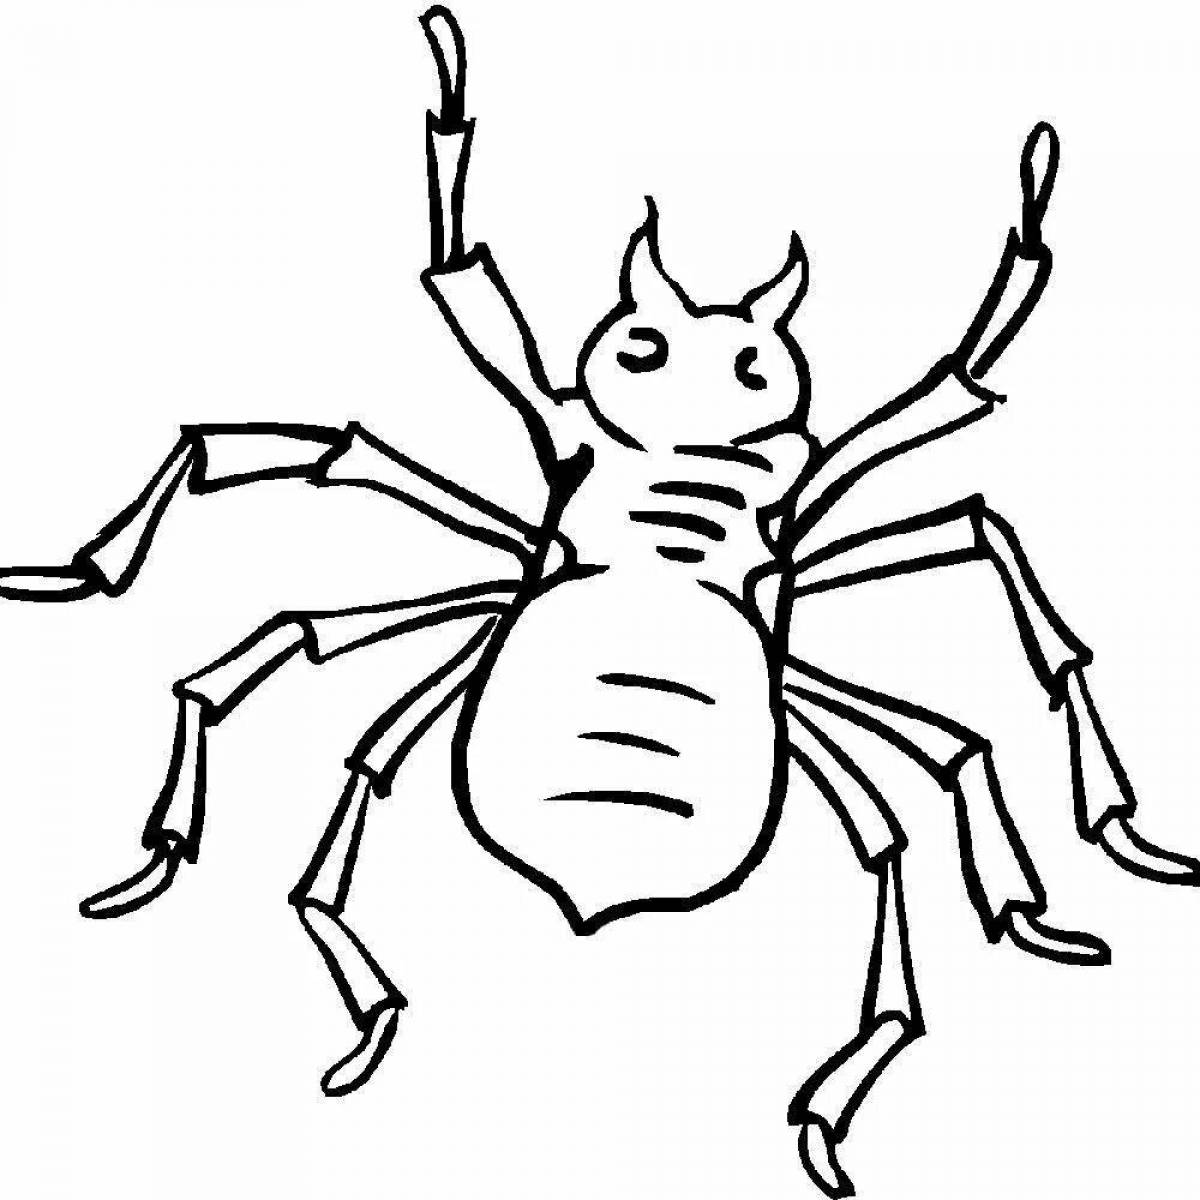 Vibrant spider coloring page for little ones